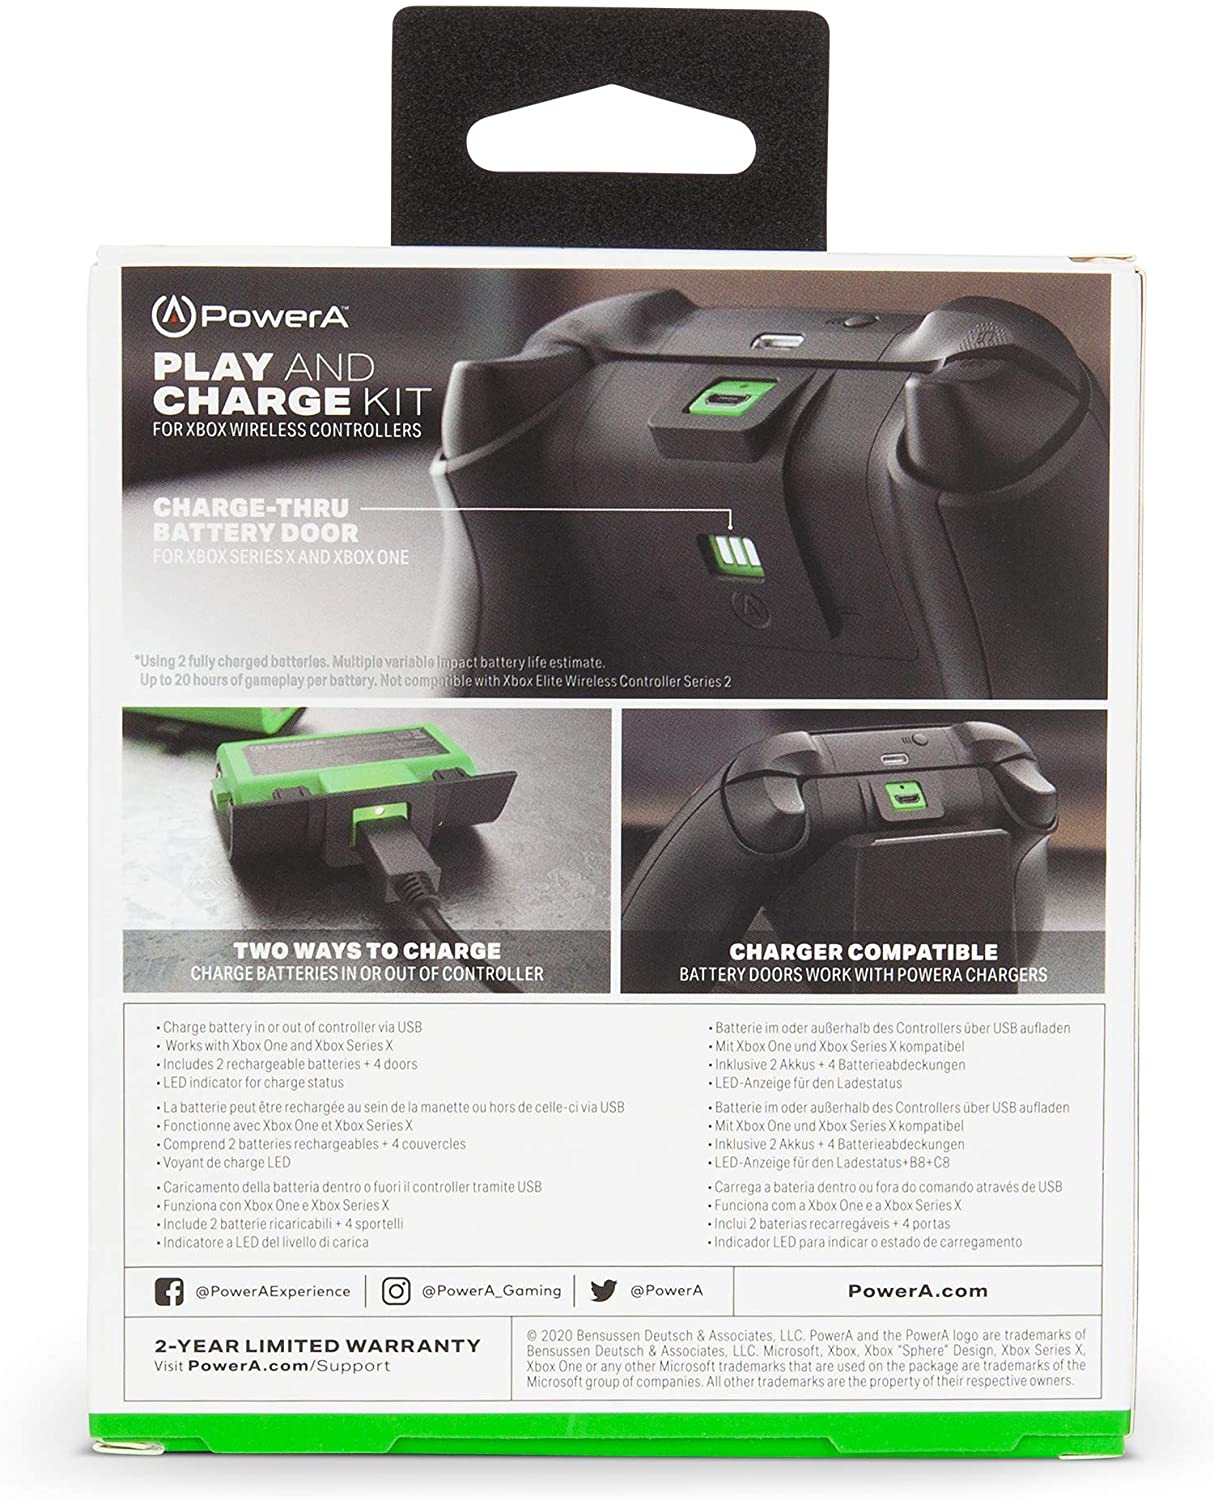 https://www.discoazul.com/uploads/media/images/kit-juega-y-carga-power-a-play-play-and-charge-kit-xbox-one-xbox-series-x-s-14.jpg